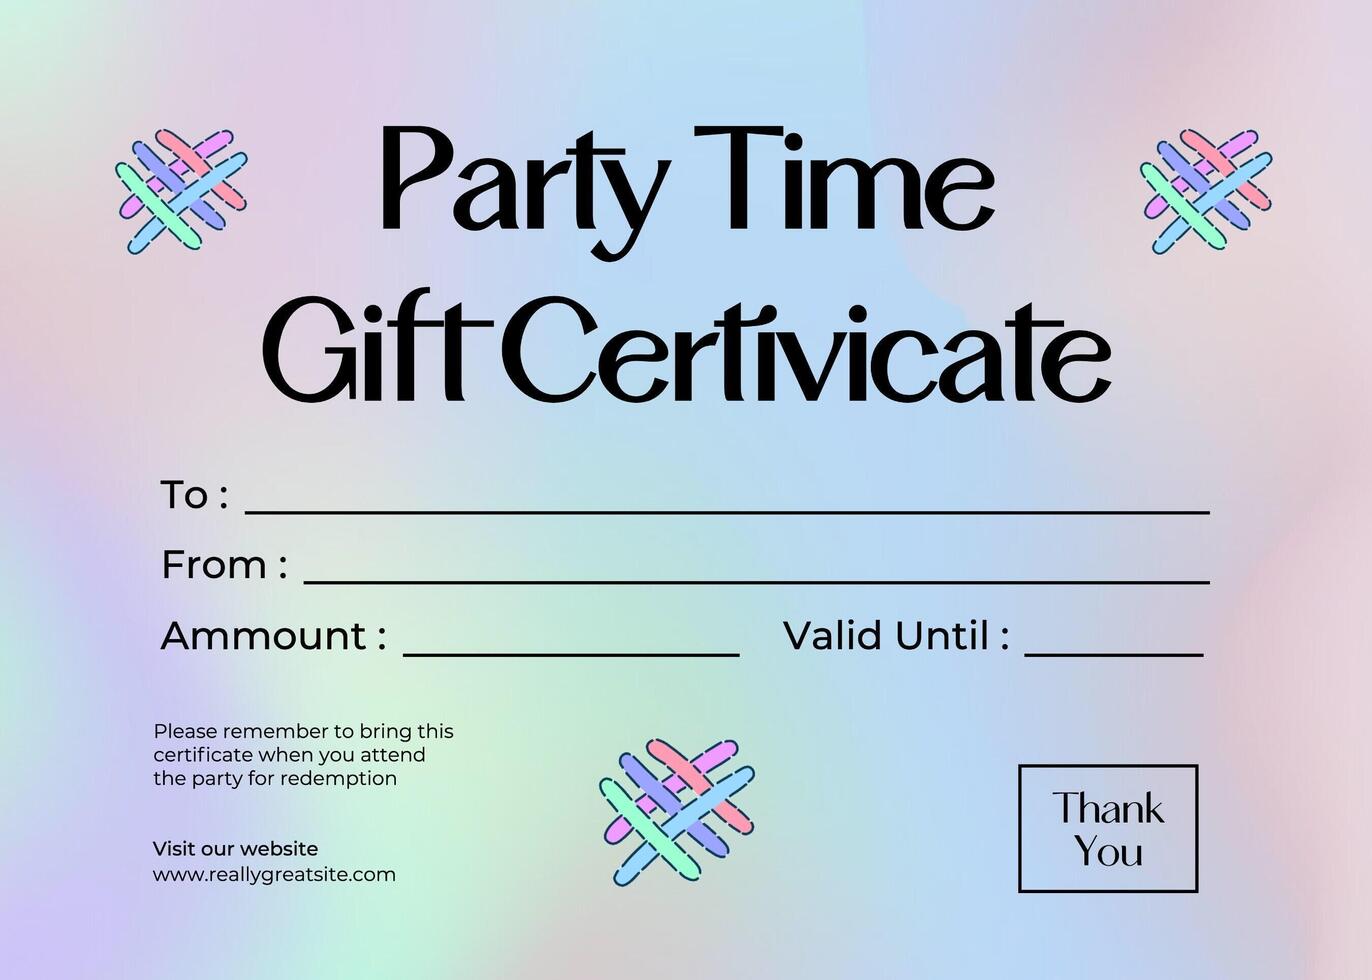 Gift Certificate Party template